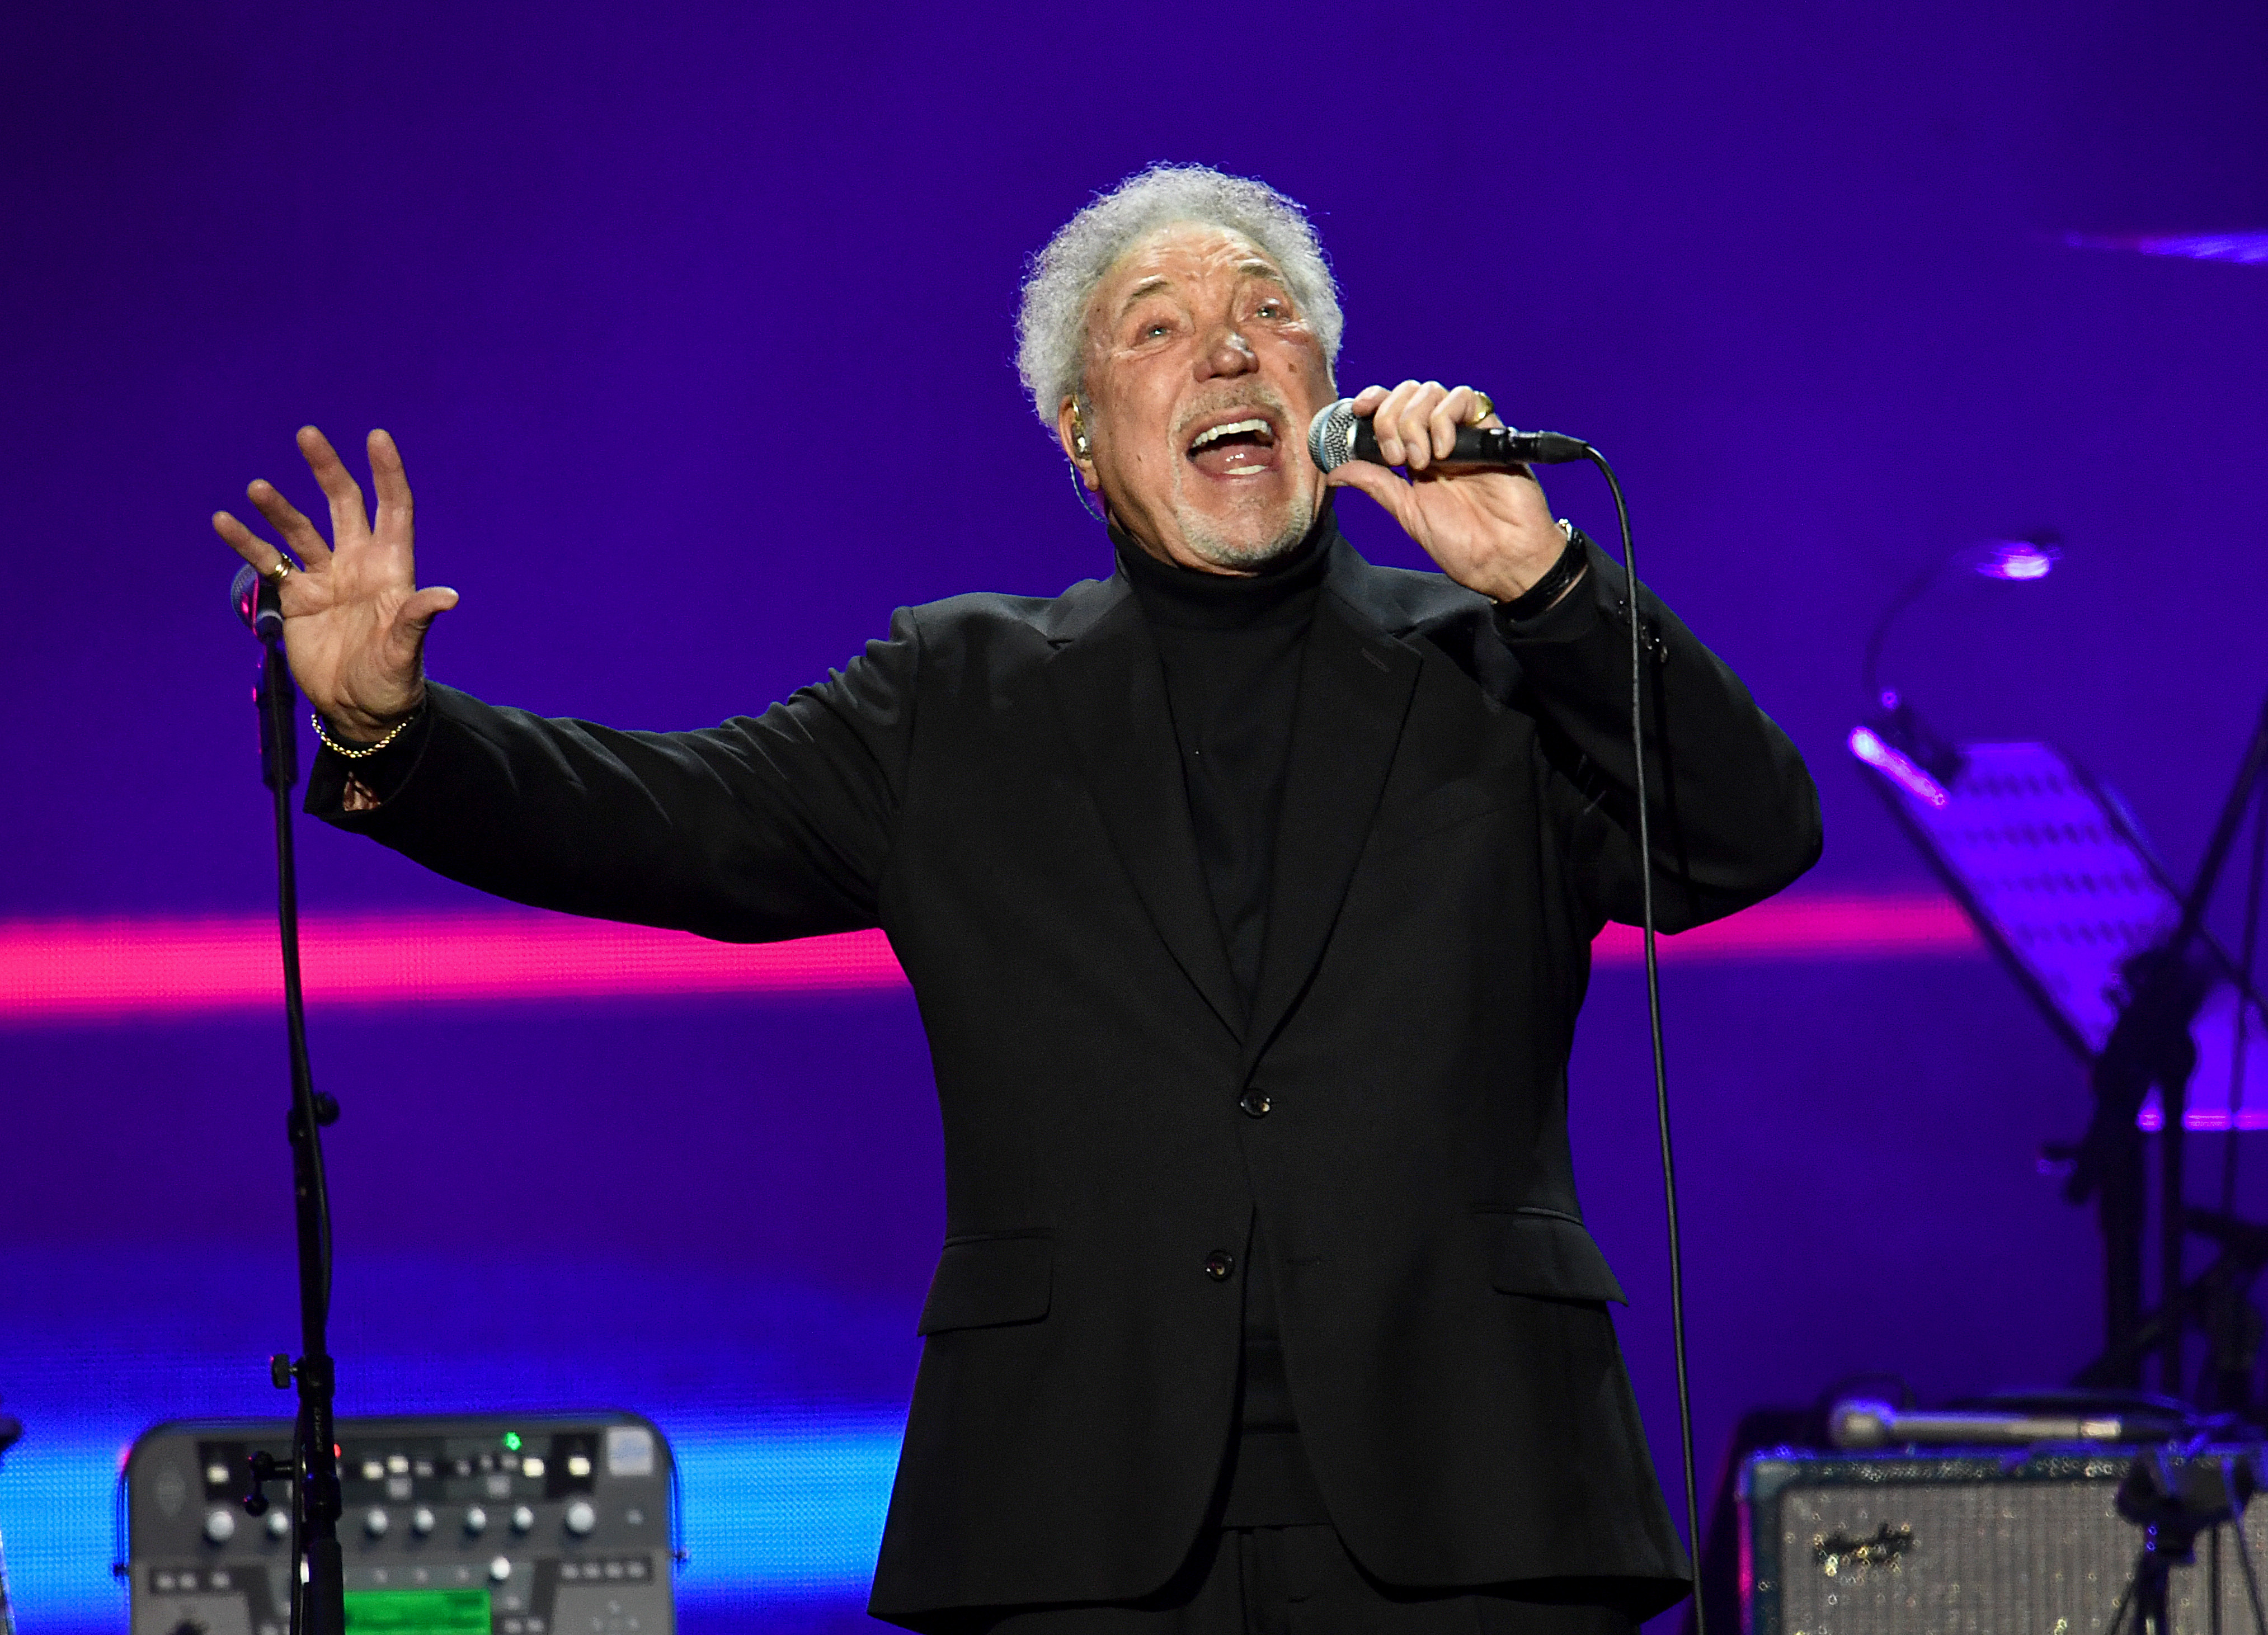 Tom Jones performs on stage at the 02 Arena in London, England on March 03, 2020 | Source: Getty Images